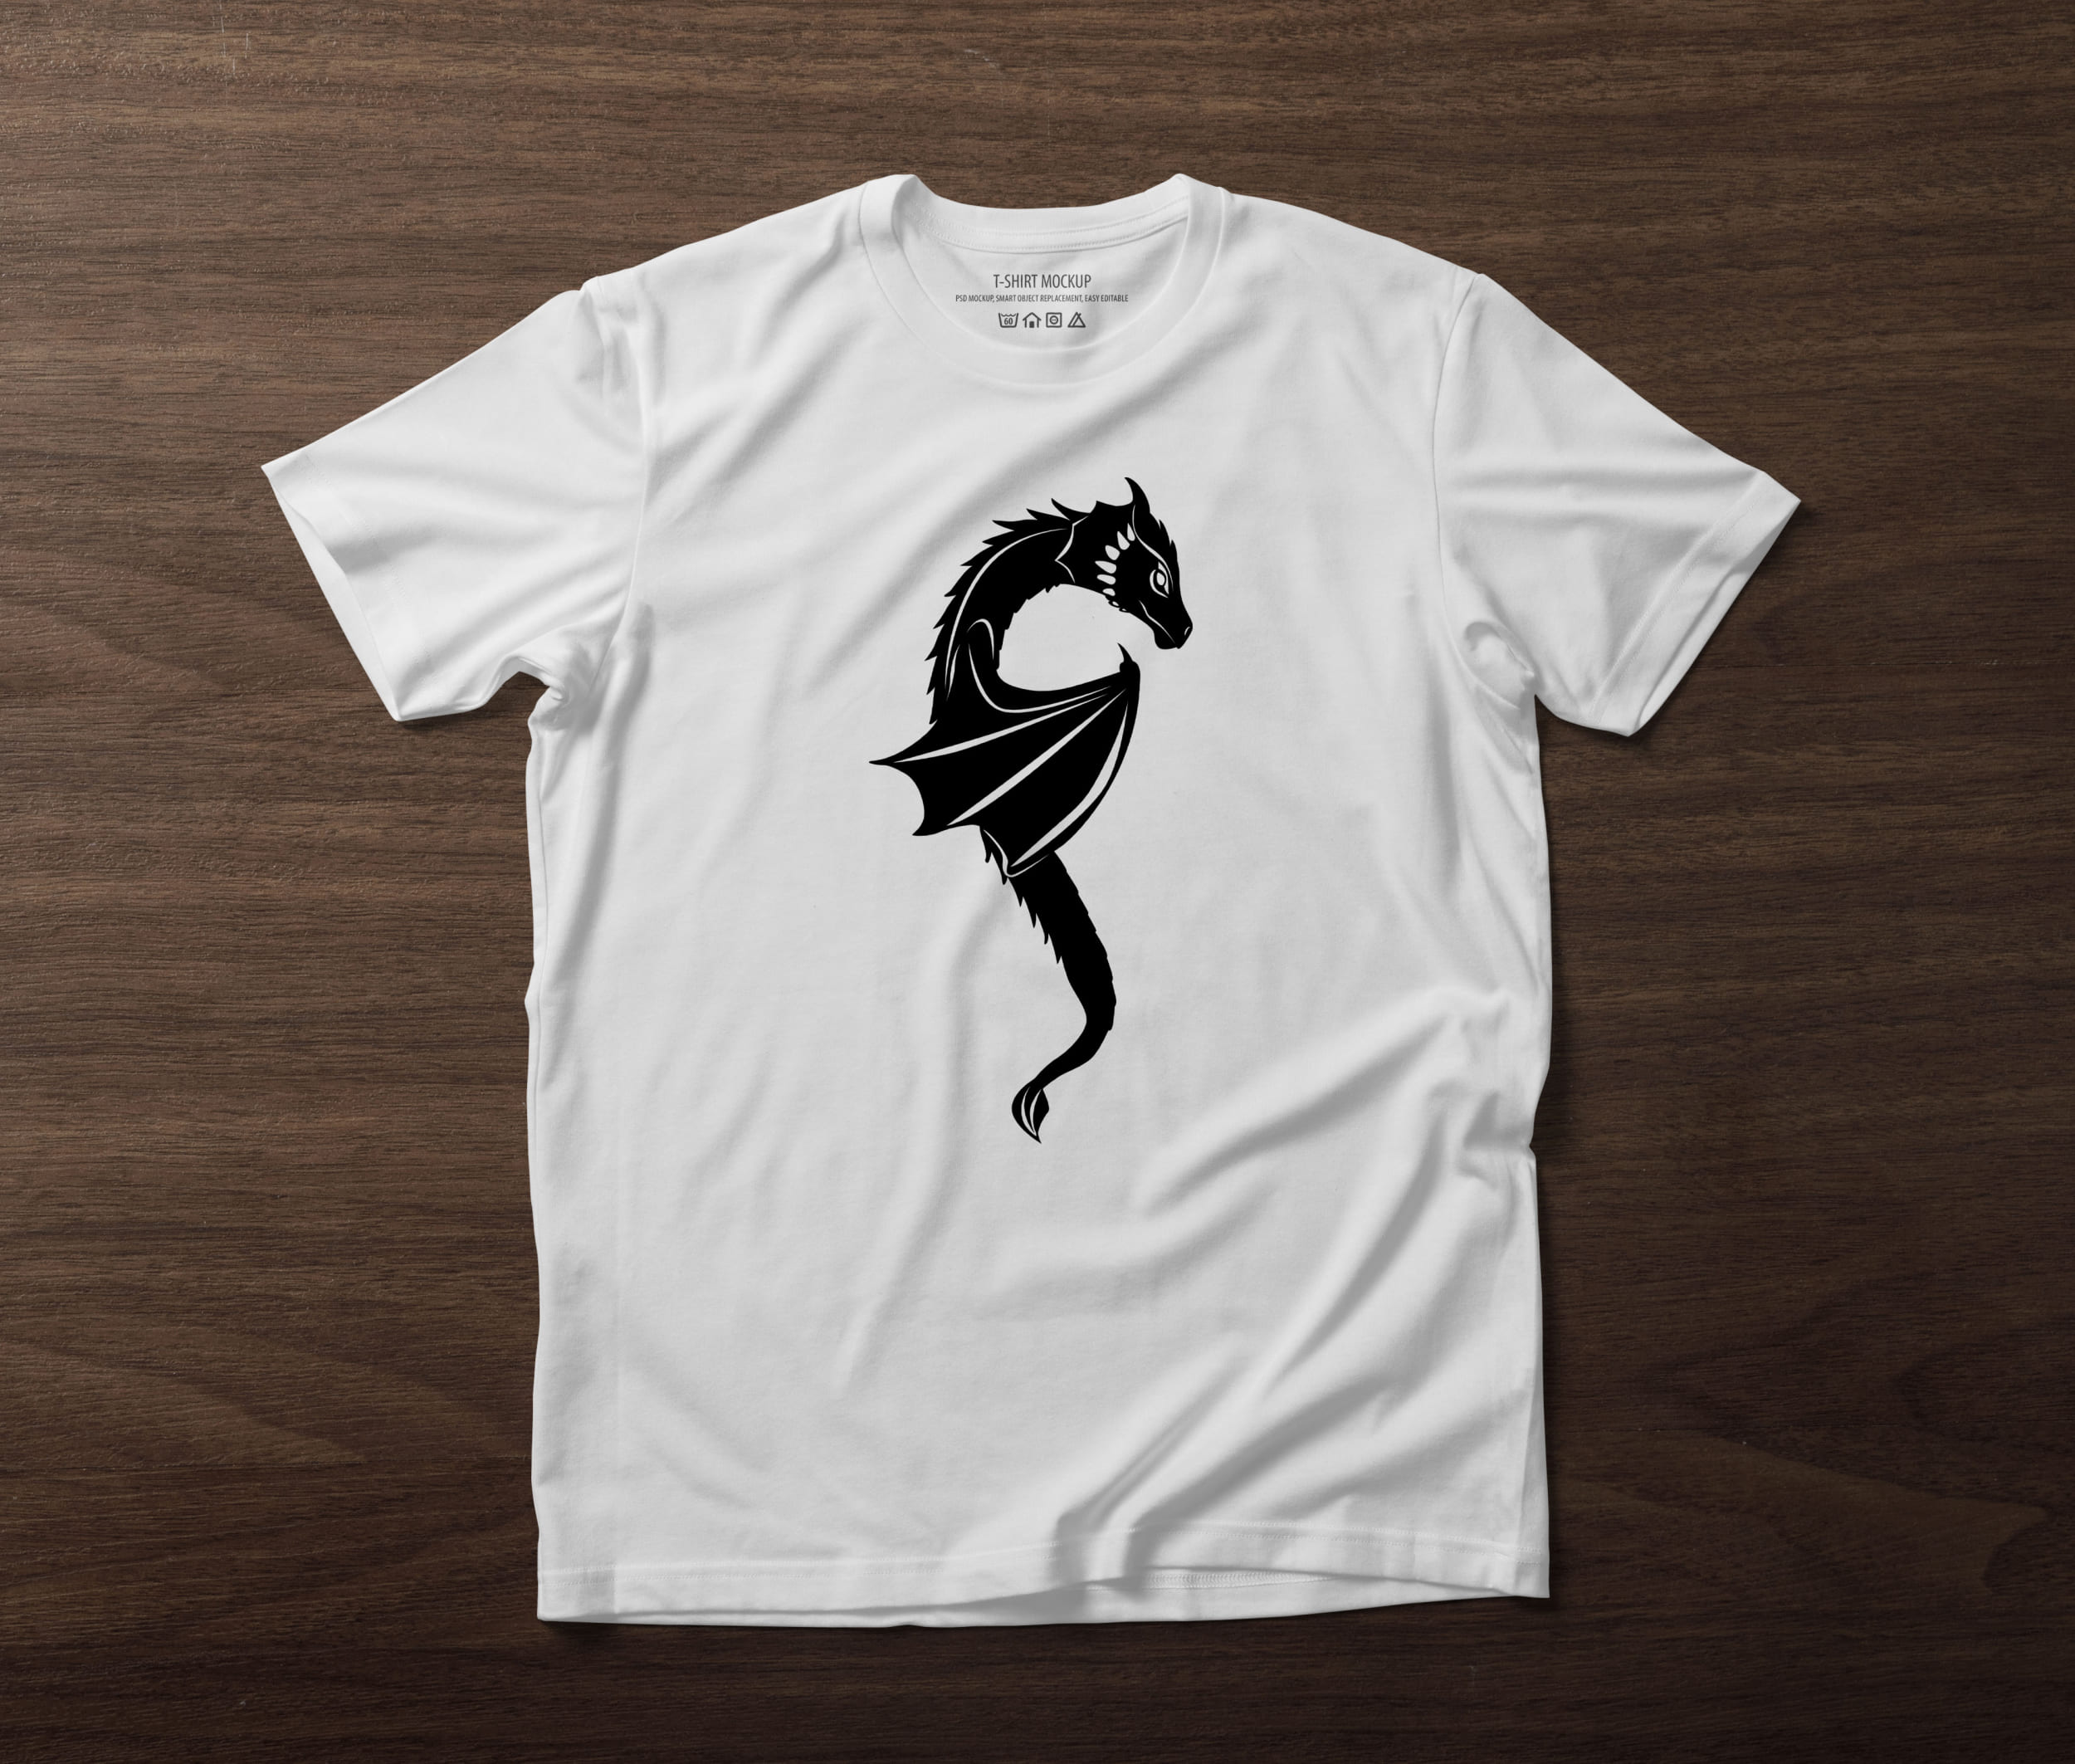 A white t-shirt on a table with a black silhouette of a little dragon.